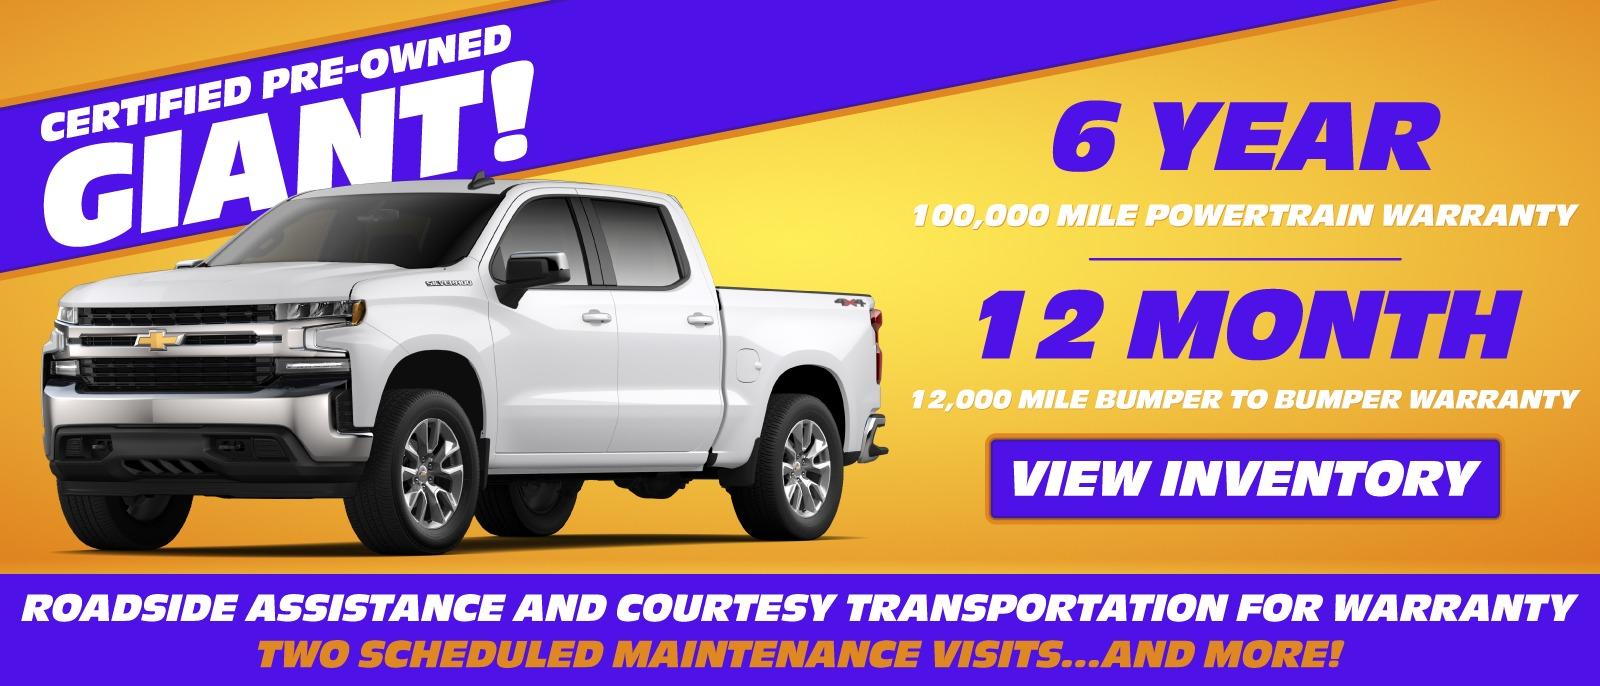 6 YEAR 100,000 MILE POWERTRAIN WARRANTY 12 MONTH 12,000 MILE BUMPER TO BUMPER WARRANTY VIEW INVENTORY ROADSIDE ASSISTANCE AND COURTESY TRANSPORTATION FOR WARRANTY TWO SCHEDULED MAINTENANCE VISITS...AND MORE!